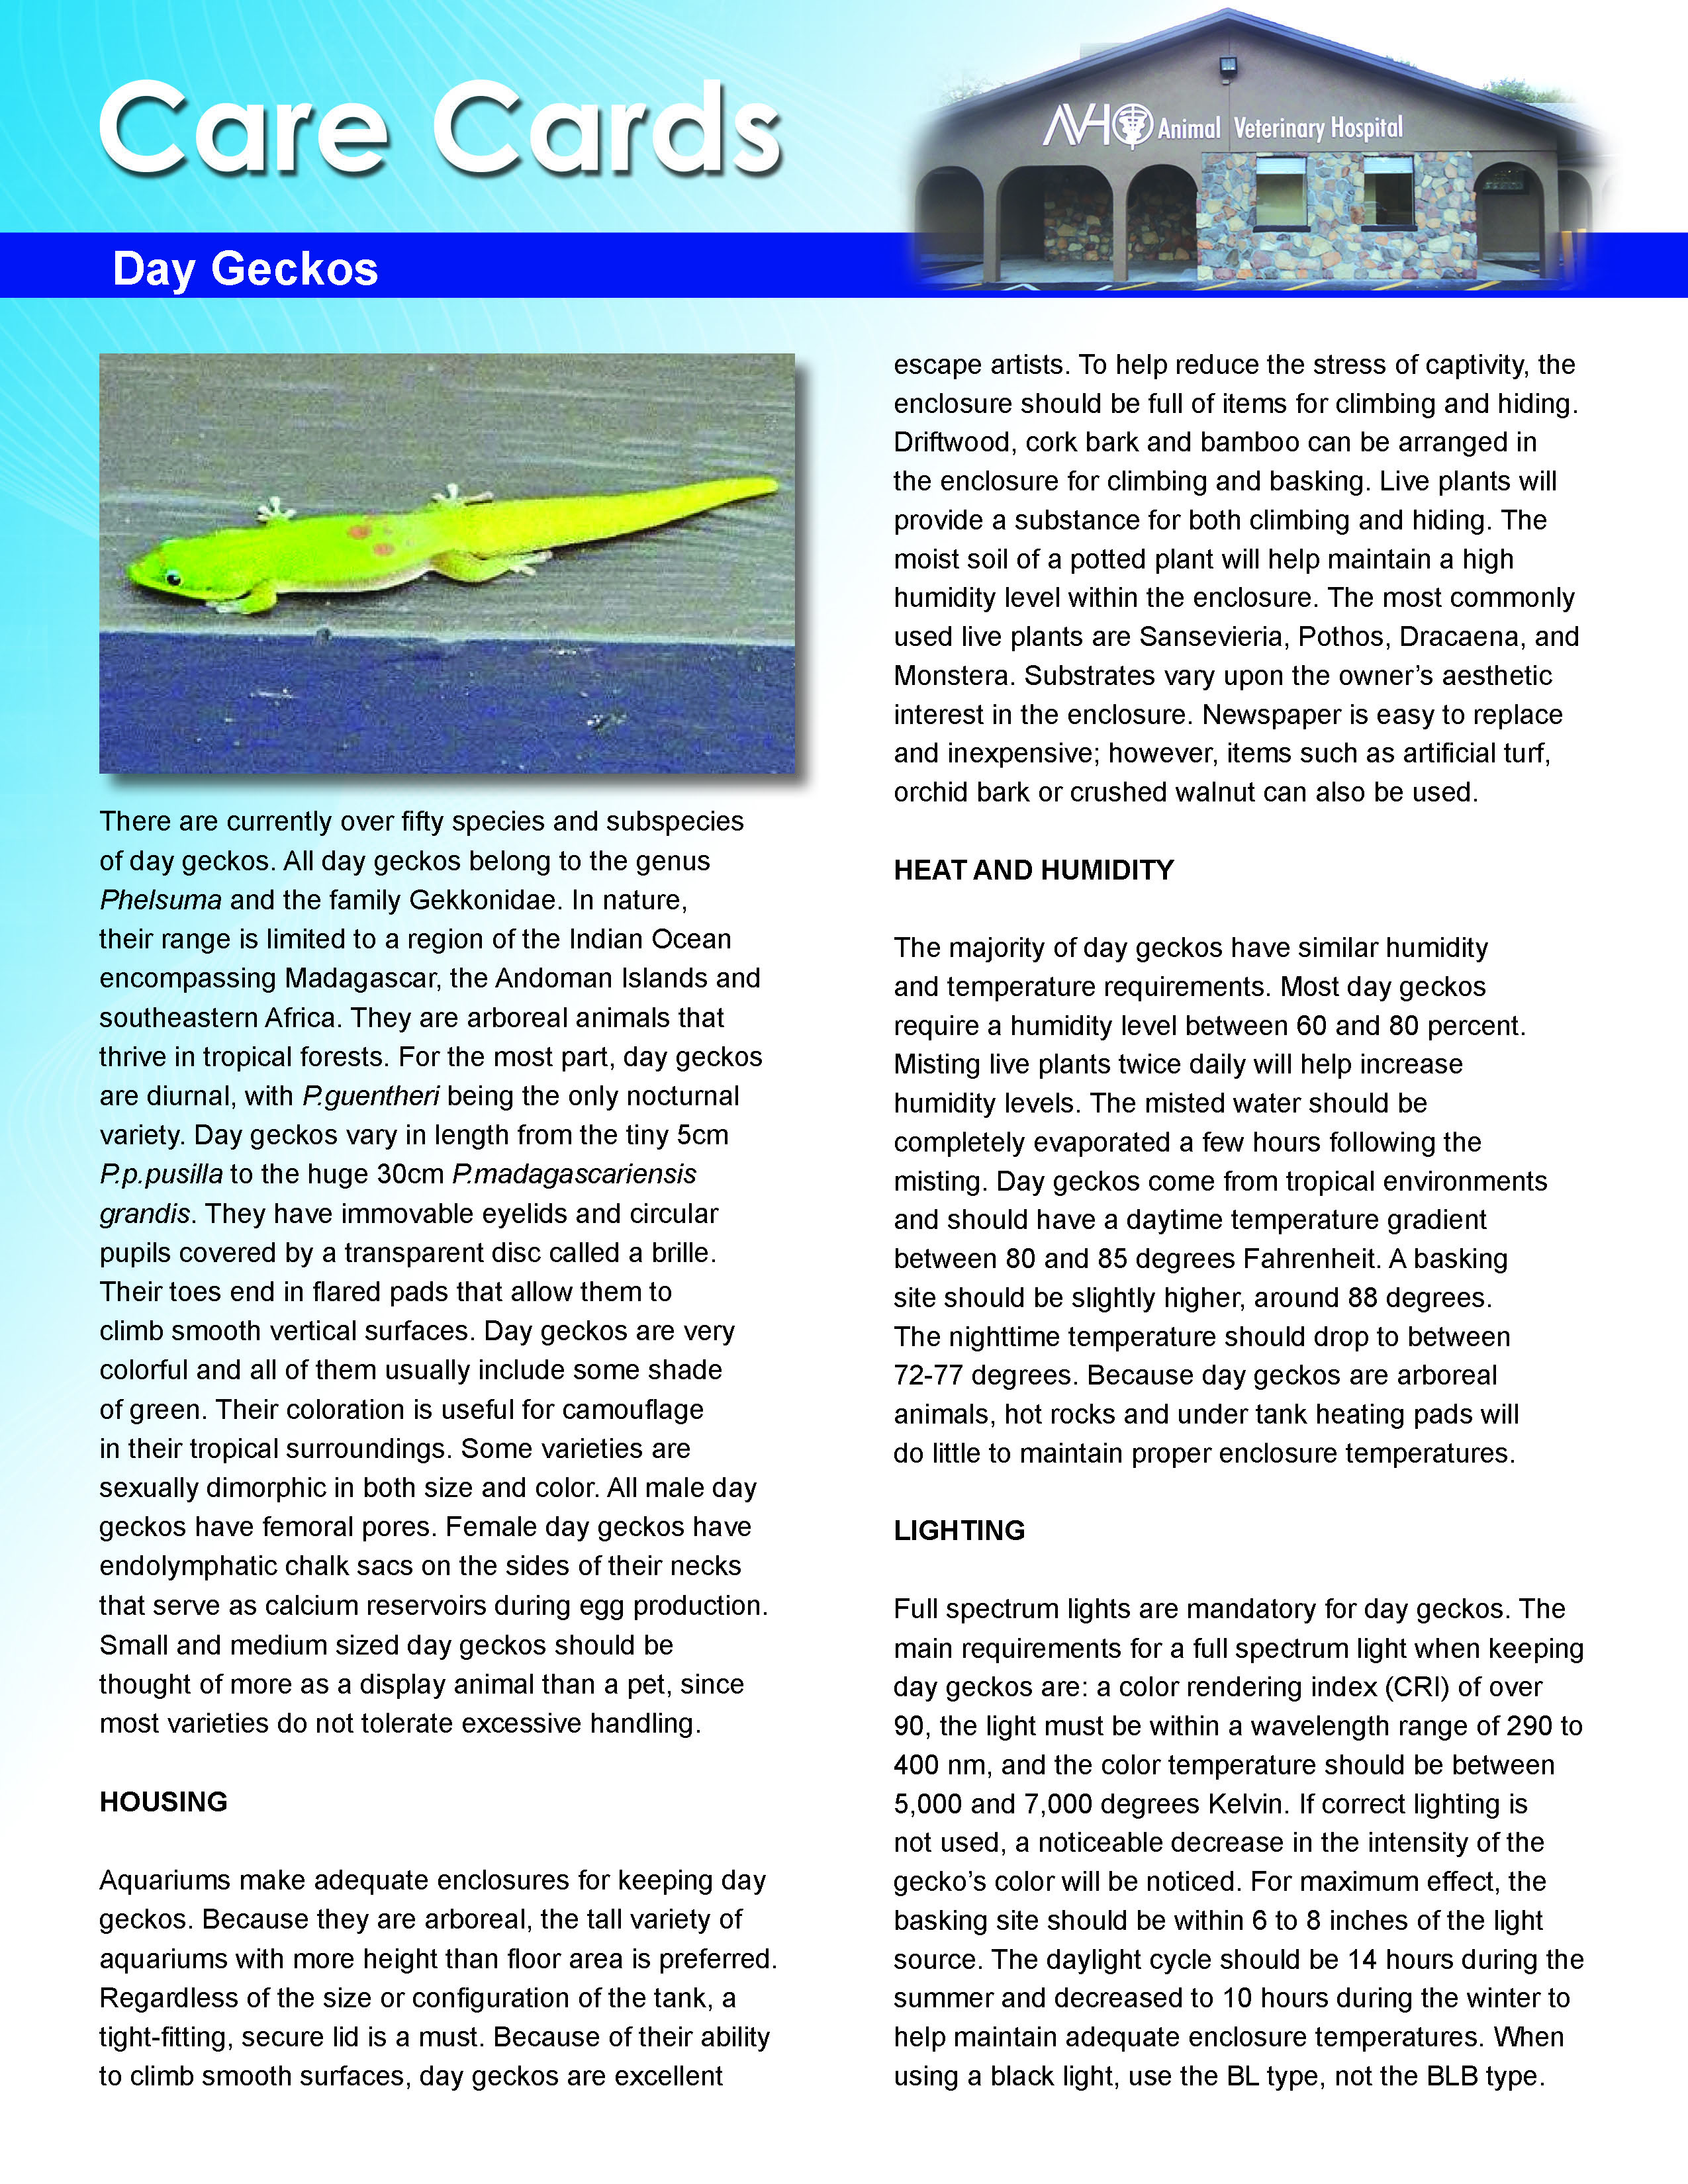 Day Gecko Care Card